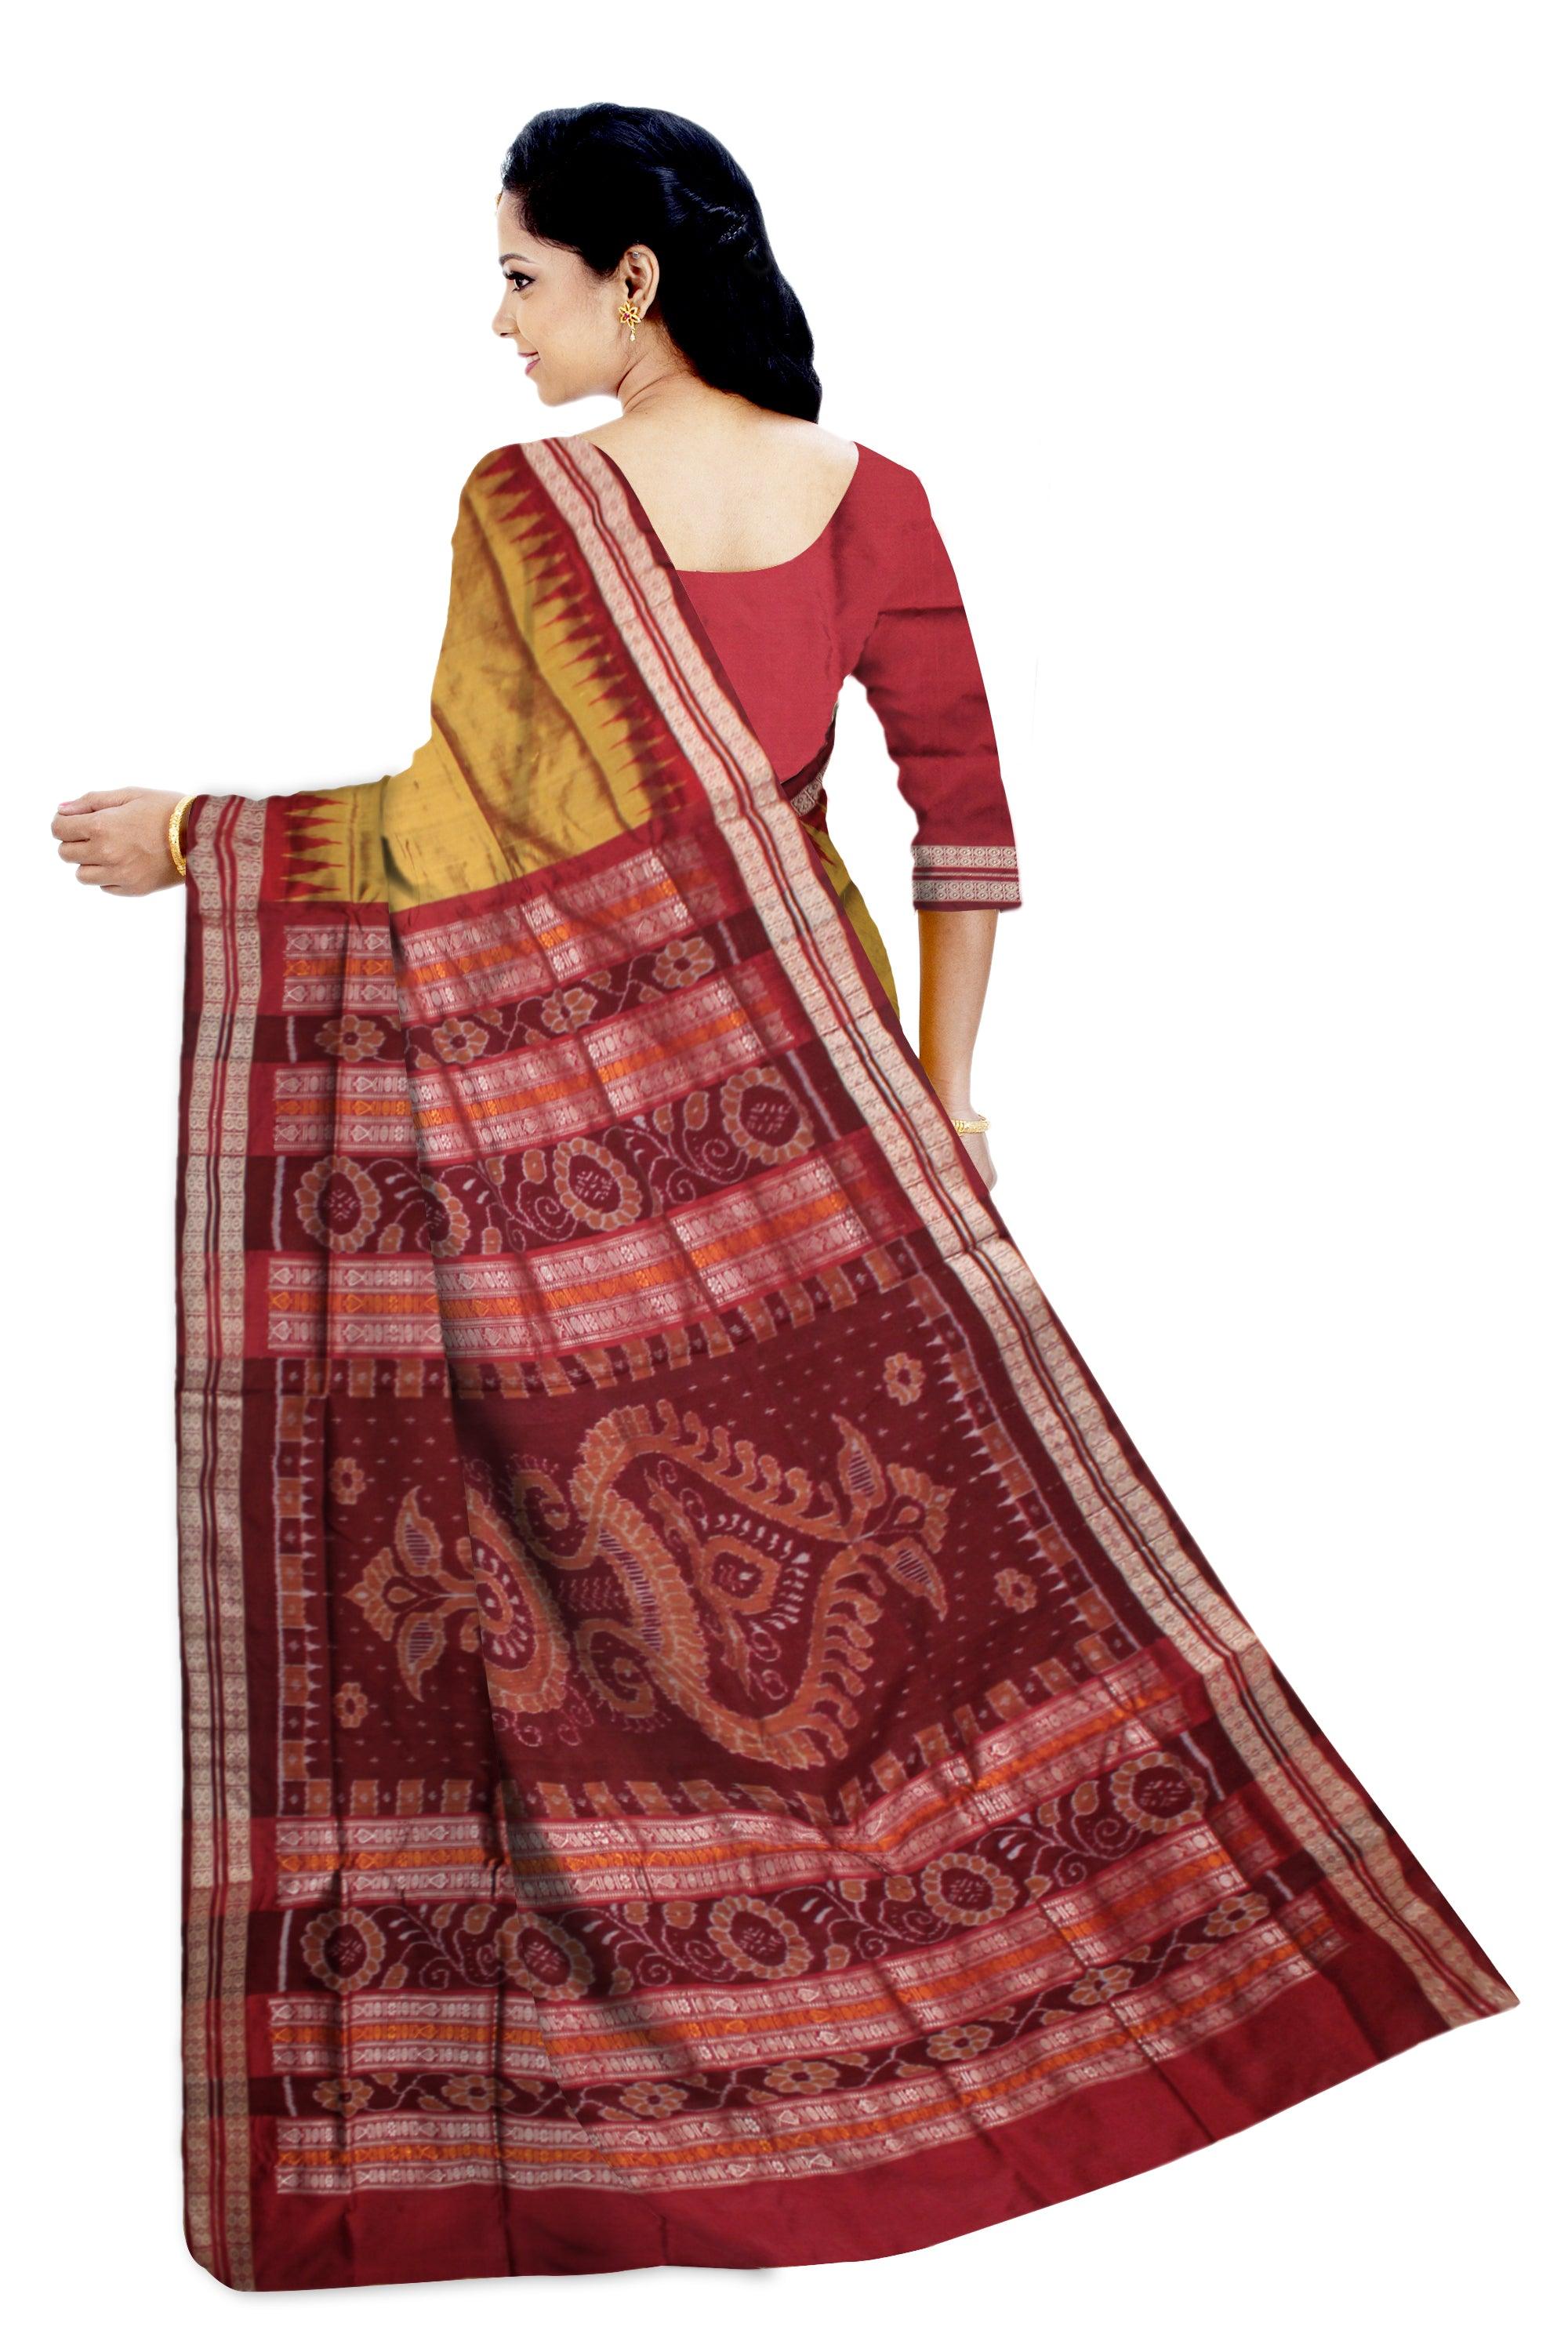 HONEY AND MAROON COLOR BOOTY PATTERN SONEPUR PATA SAREE , WITH BLOUSE PIECE. - Koshali Arts & Crafts Enterprise